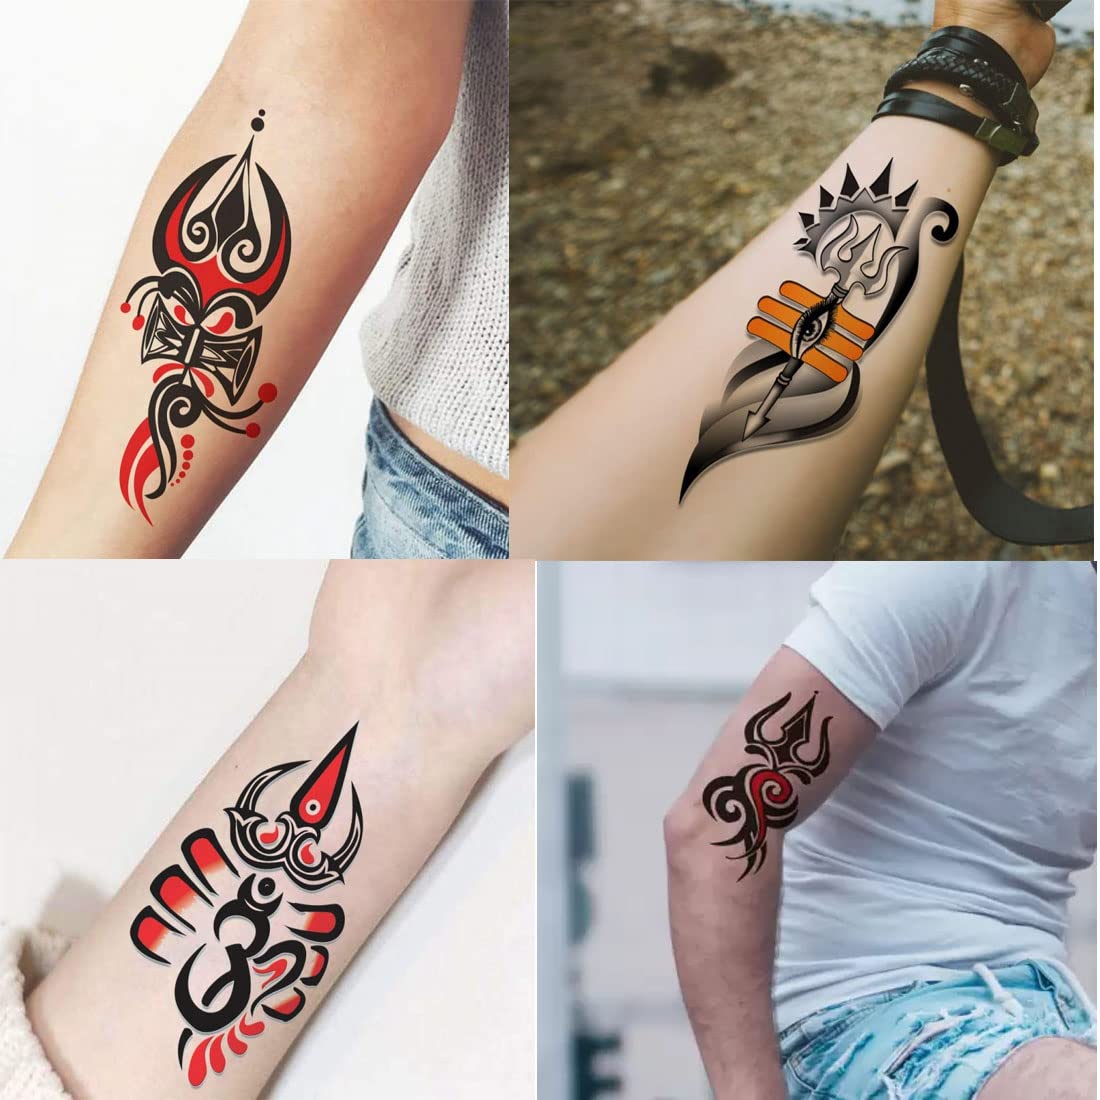 Details more than 150 combo tattoo super hot